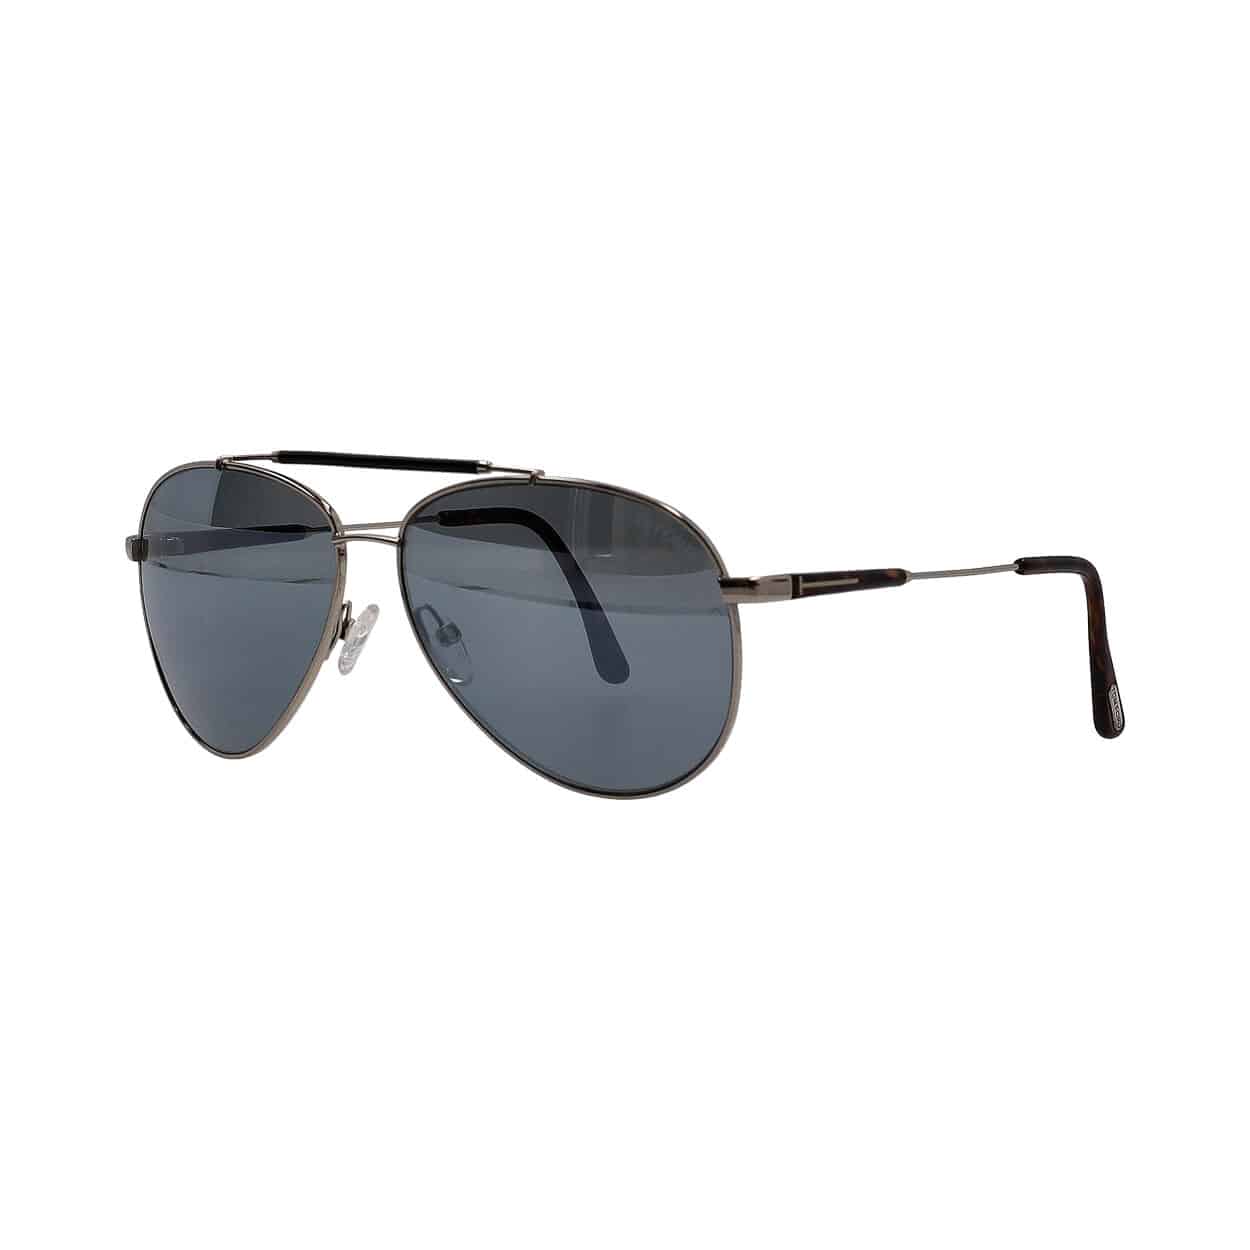 TOM FORD Rick Sunglasses TF378 Silver/Tortoise | Luxity